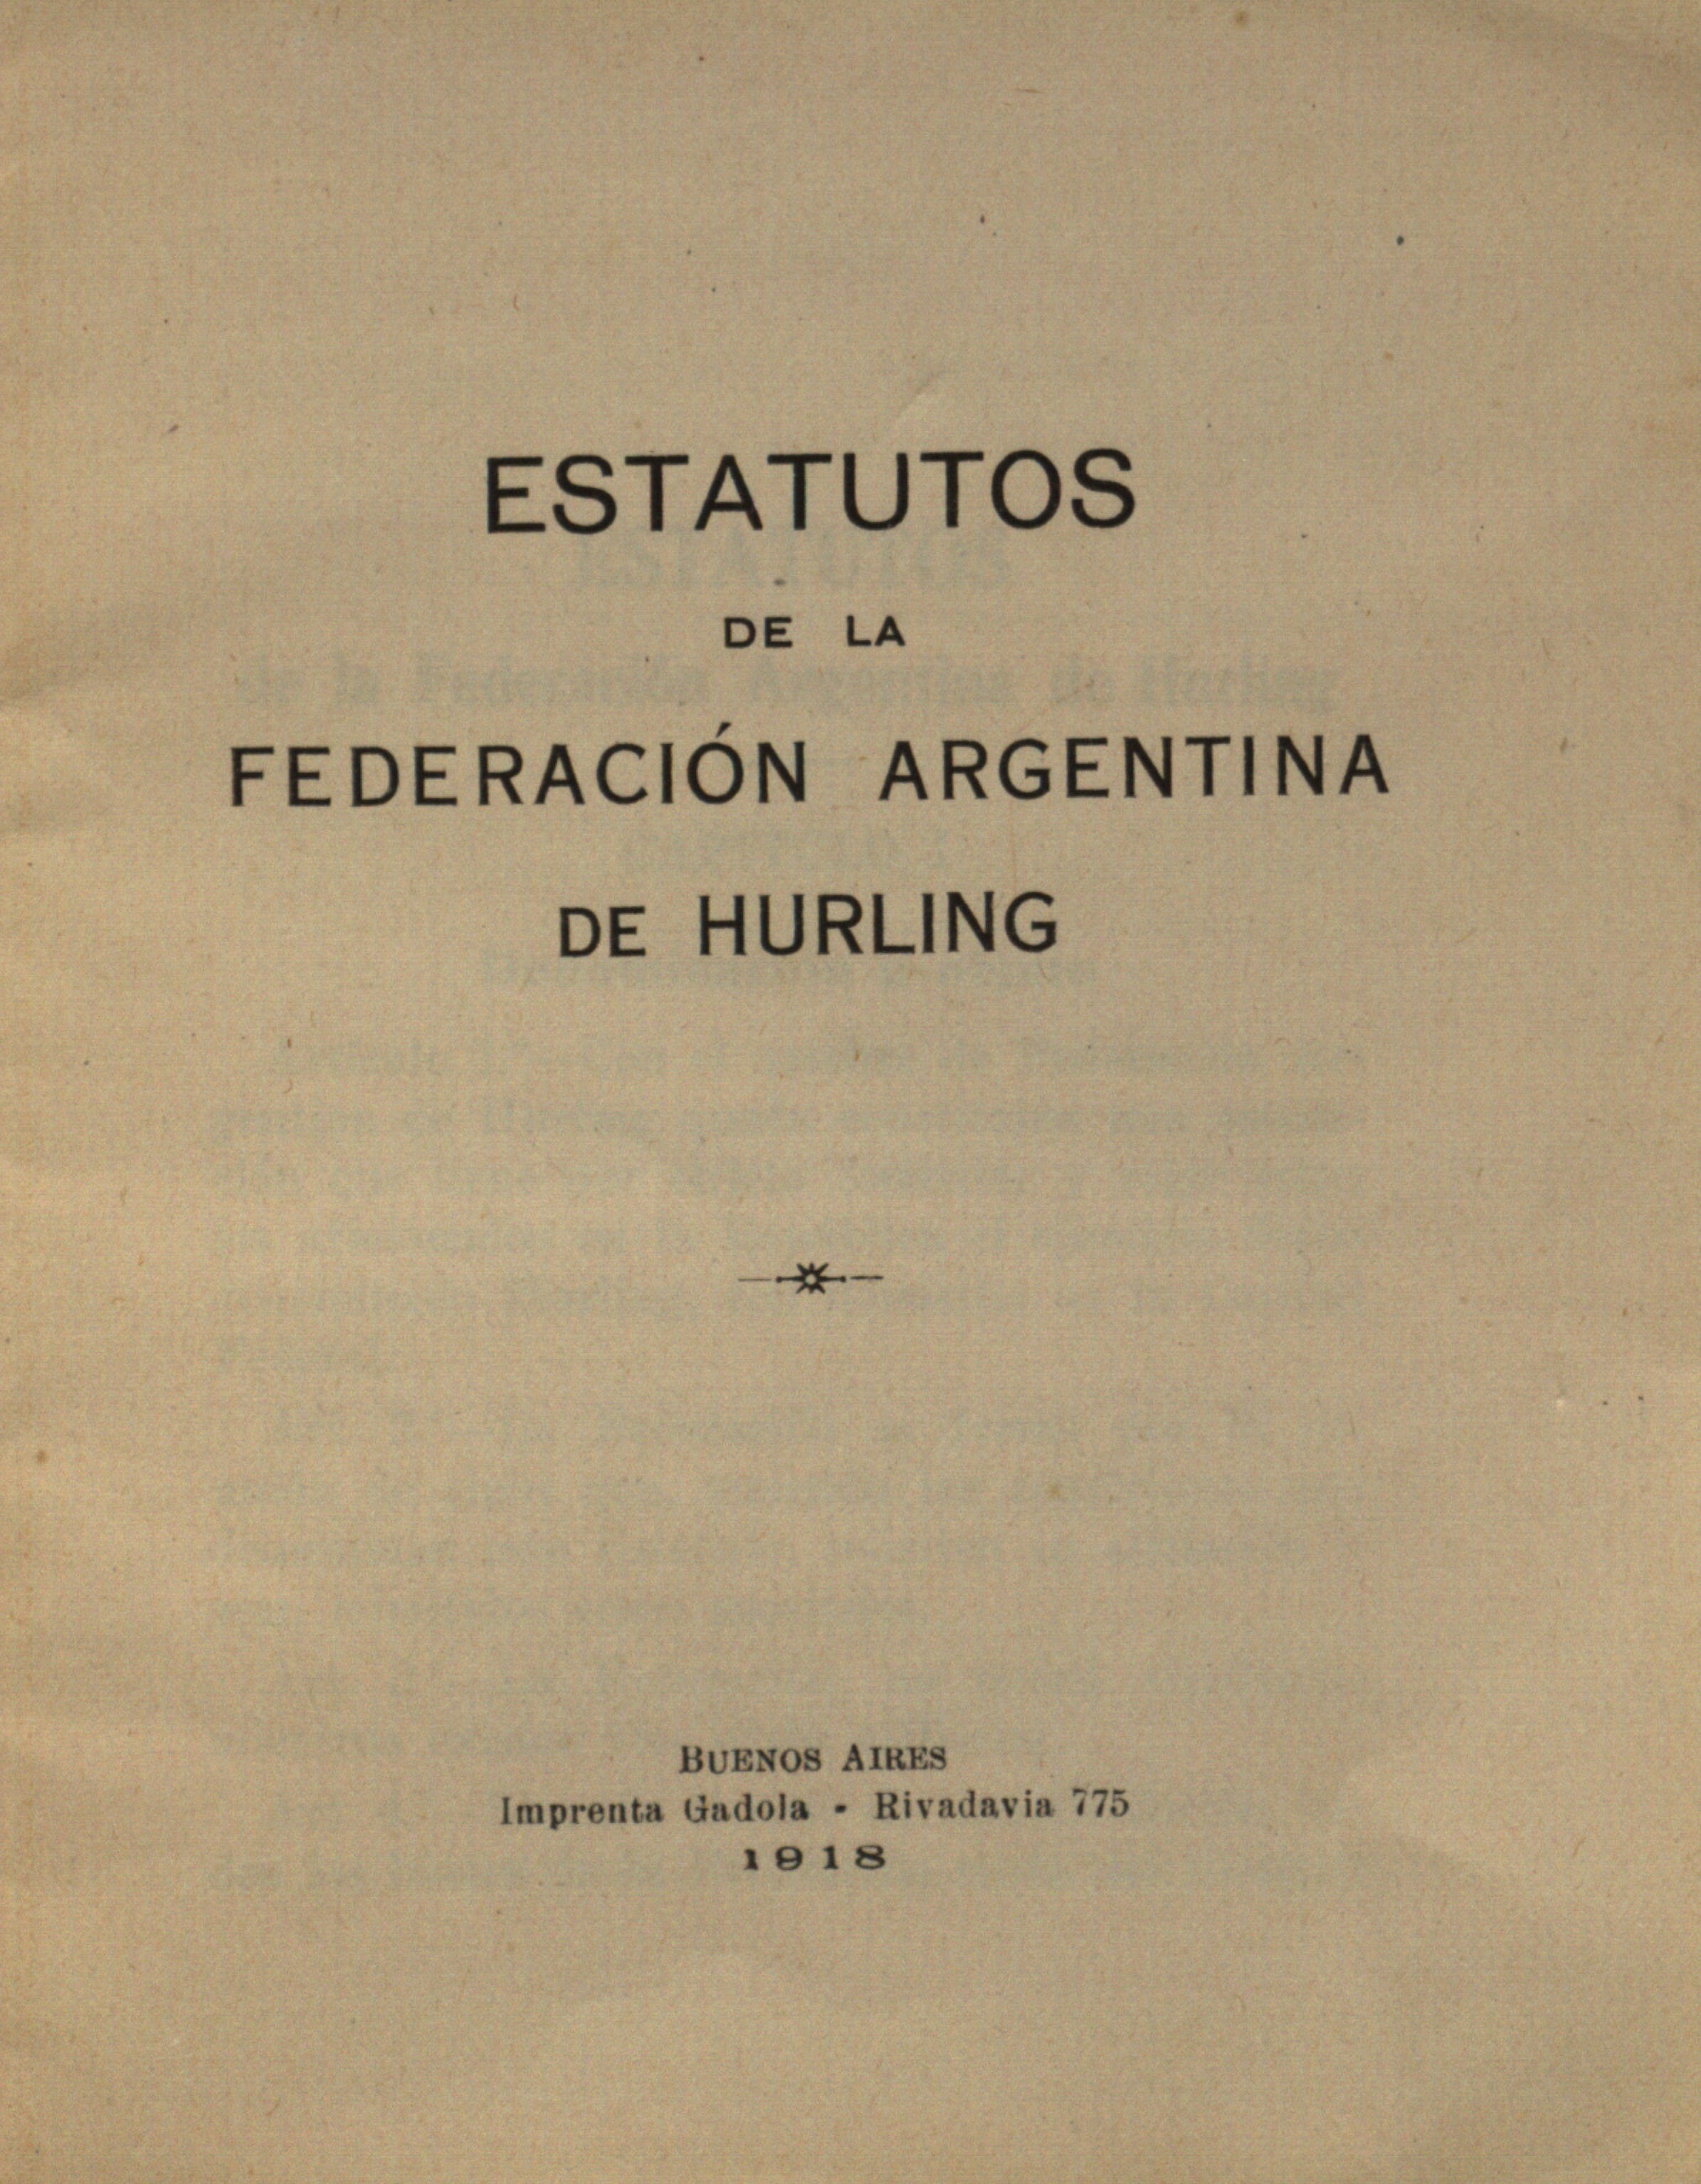 A rule book for the Irish-Argentine Hurling Federation, 1918. Gaelic games were played in Argentina from the 1880s but became more widespread in the early 20th century through a network of Catholic Irish-Argentine schools.